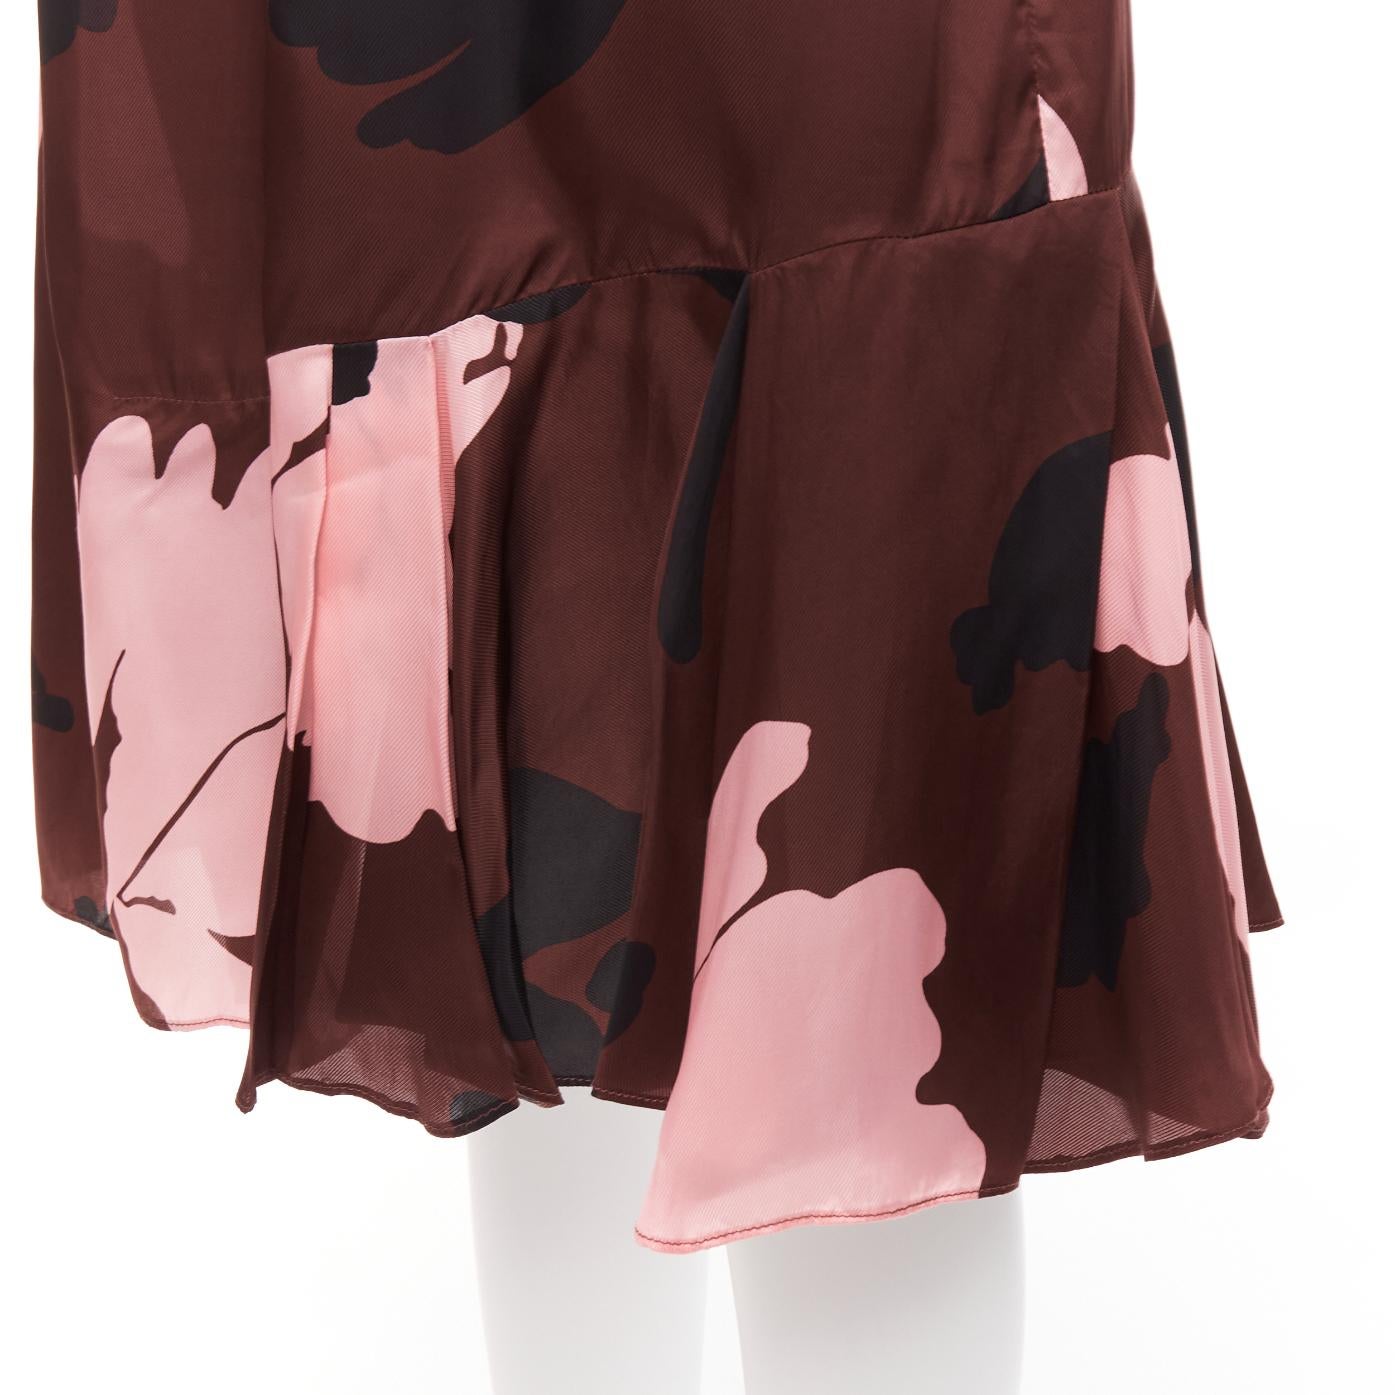 MARNI 2013 brown pink big floral print elastic waistband knee skirt IT40 S
Reference: CELG/A00427
Brand: Marni
Material: Viscose
Color: Brown, Pink
Pattern: Floral
Closure: Zip
Extra Details: Elastic waistband with side zip.
Made in: